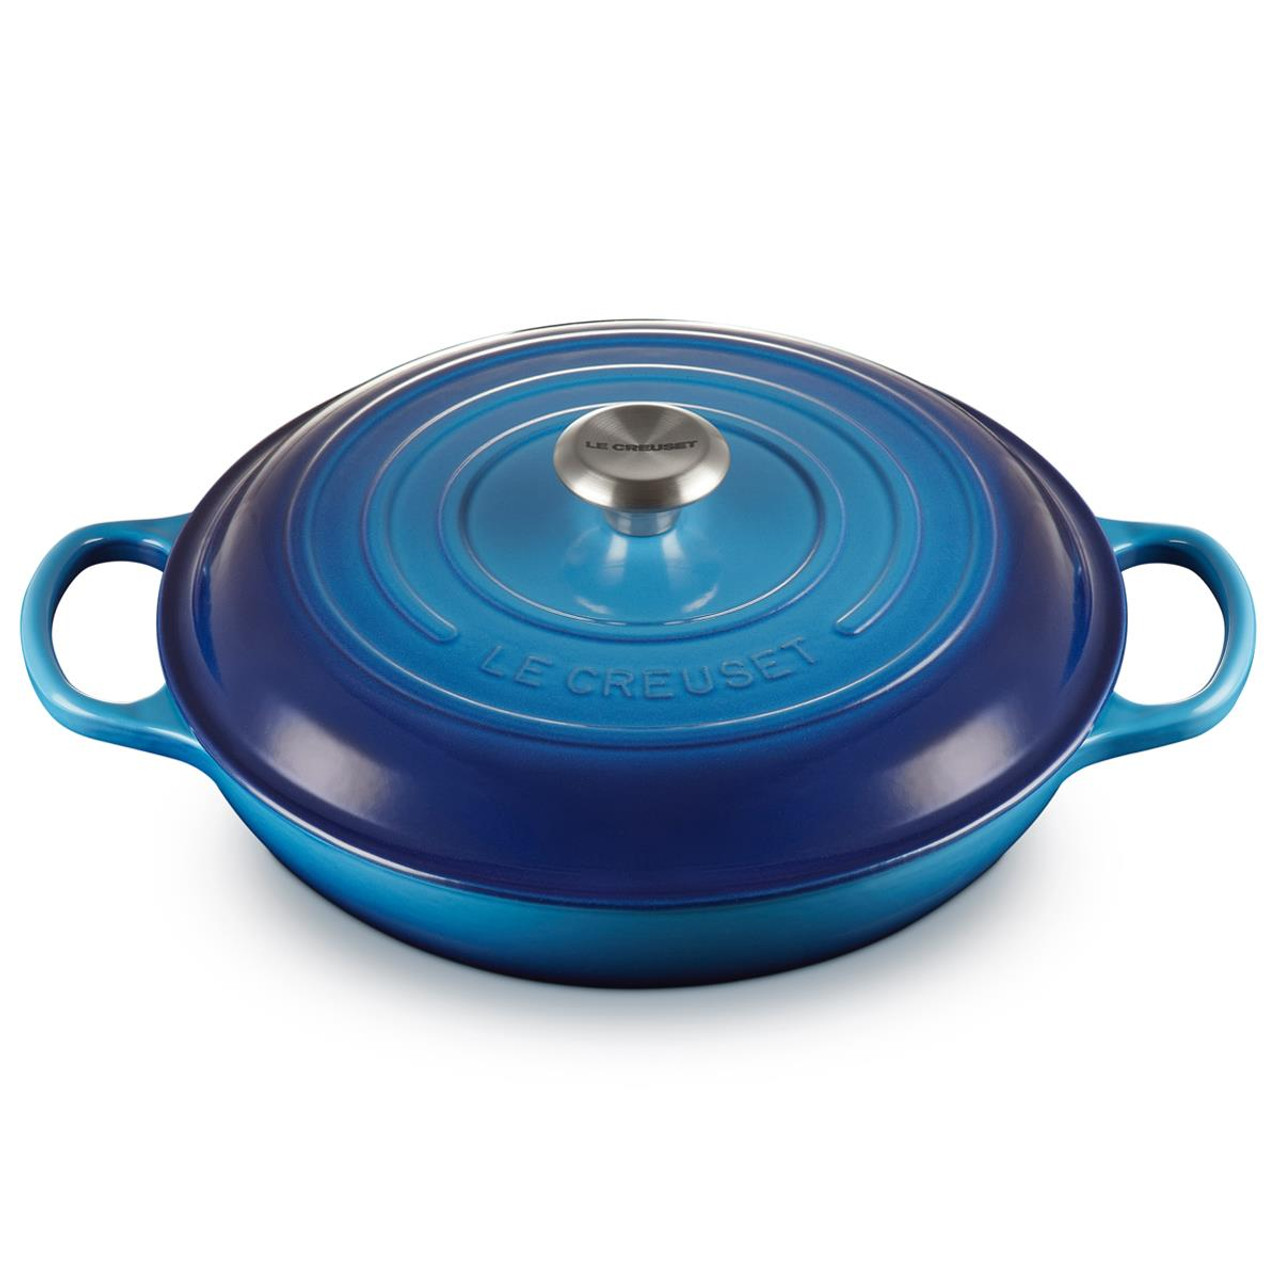 How to clean a Le Creuset Shallow Casserole dish?